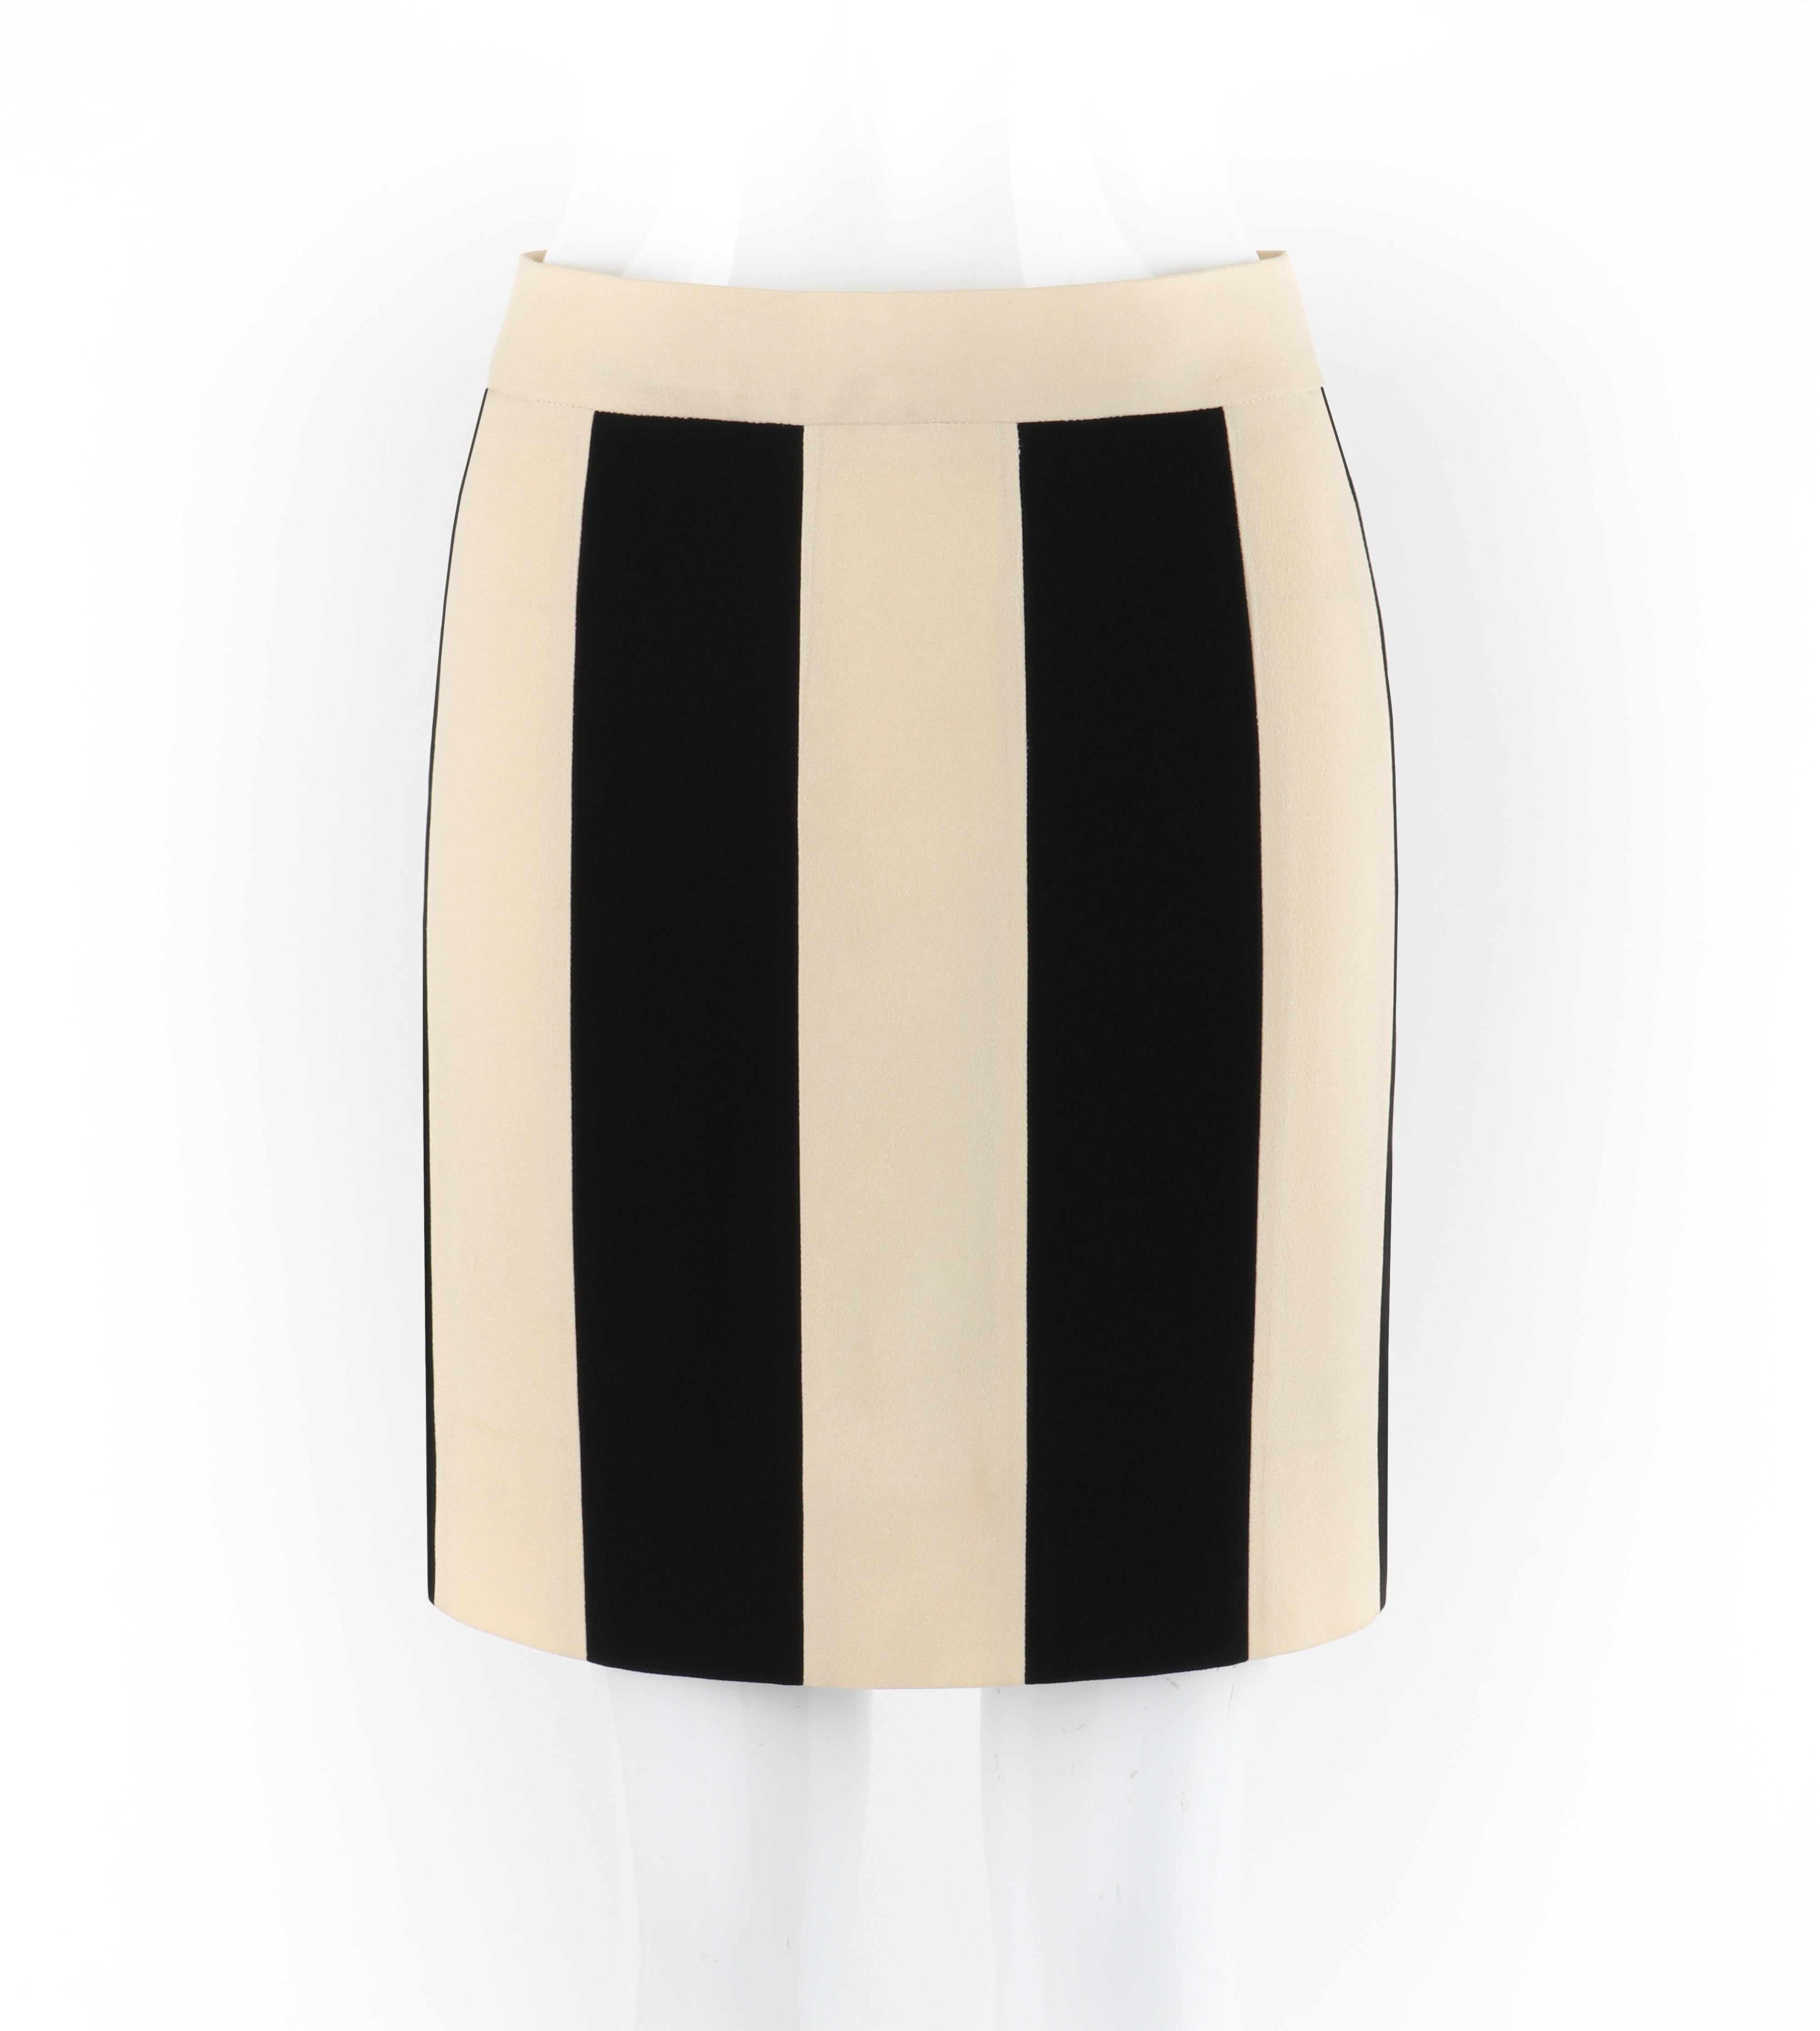 Brand / Manufacturer: Moschino
Collection: Spring 2006
Designer: Rosella Jardini
Style: Above-the-knee skirt
Color(s): Shades of ivory, black, white
Lined: Yes
Marked Fabric Content: 